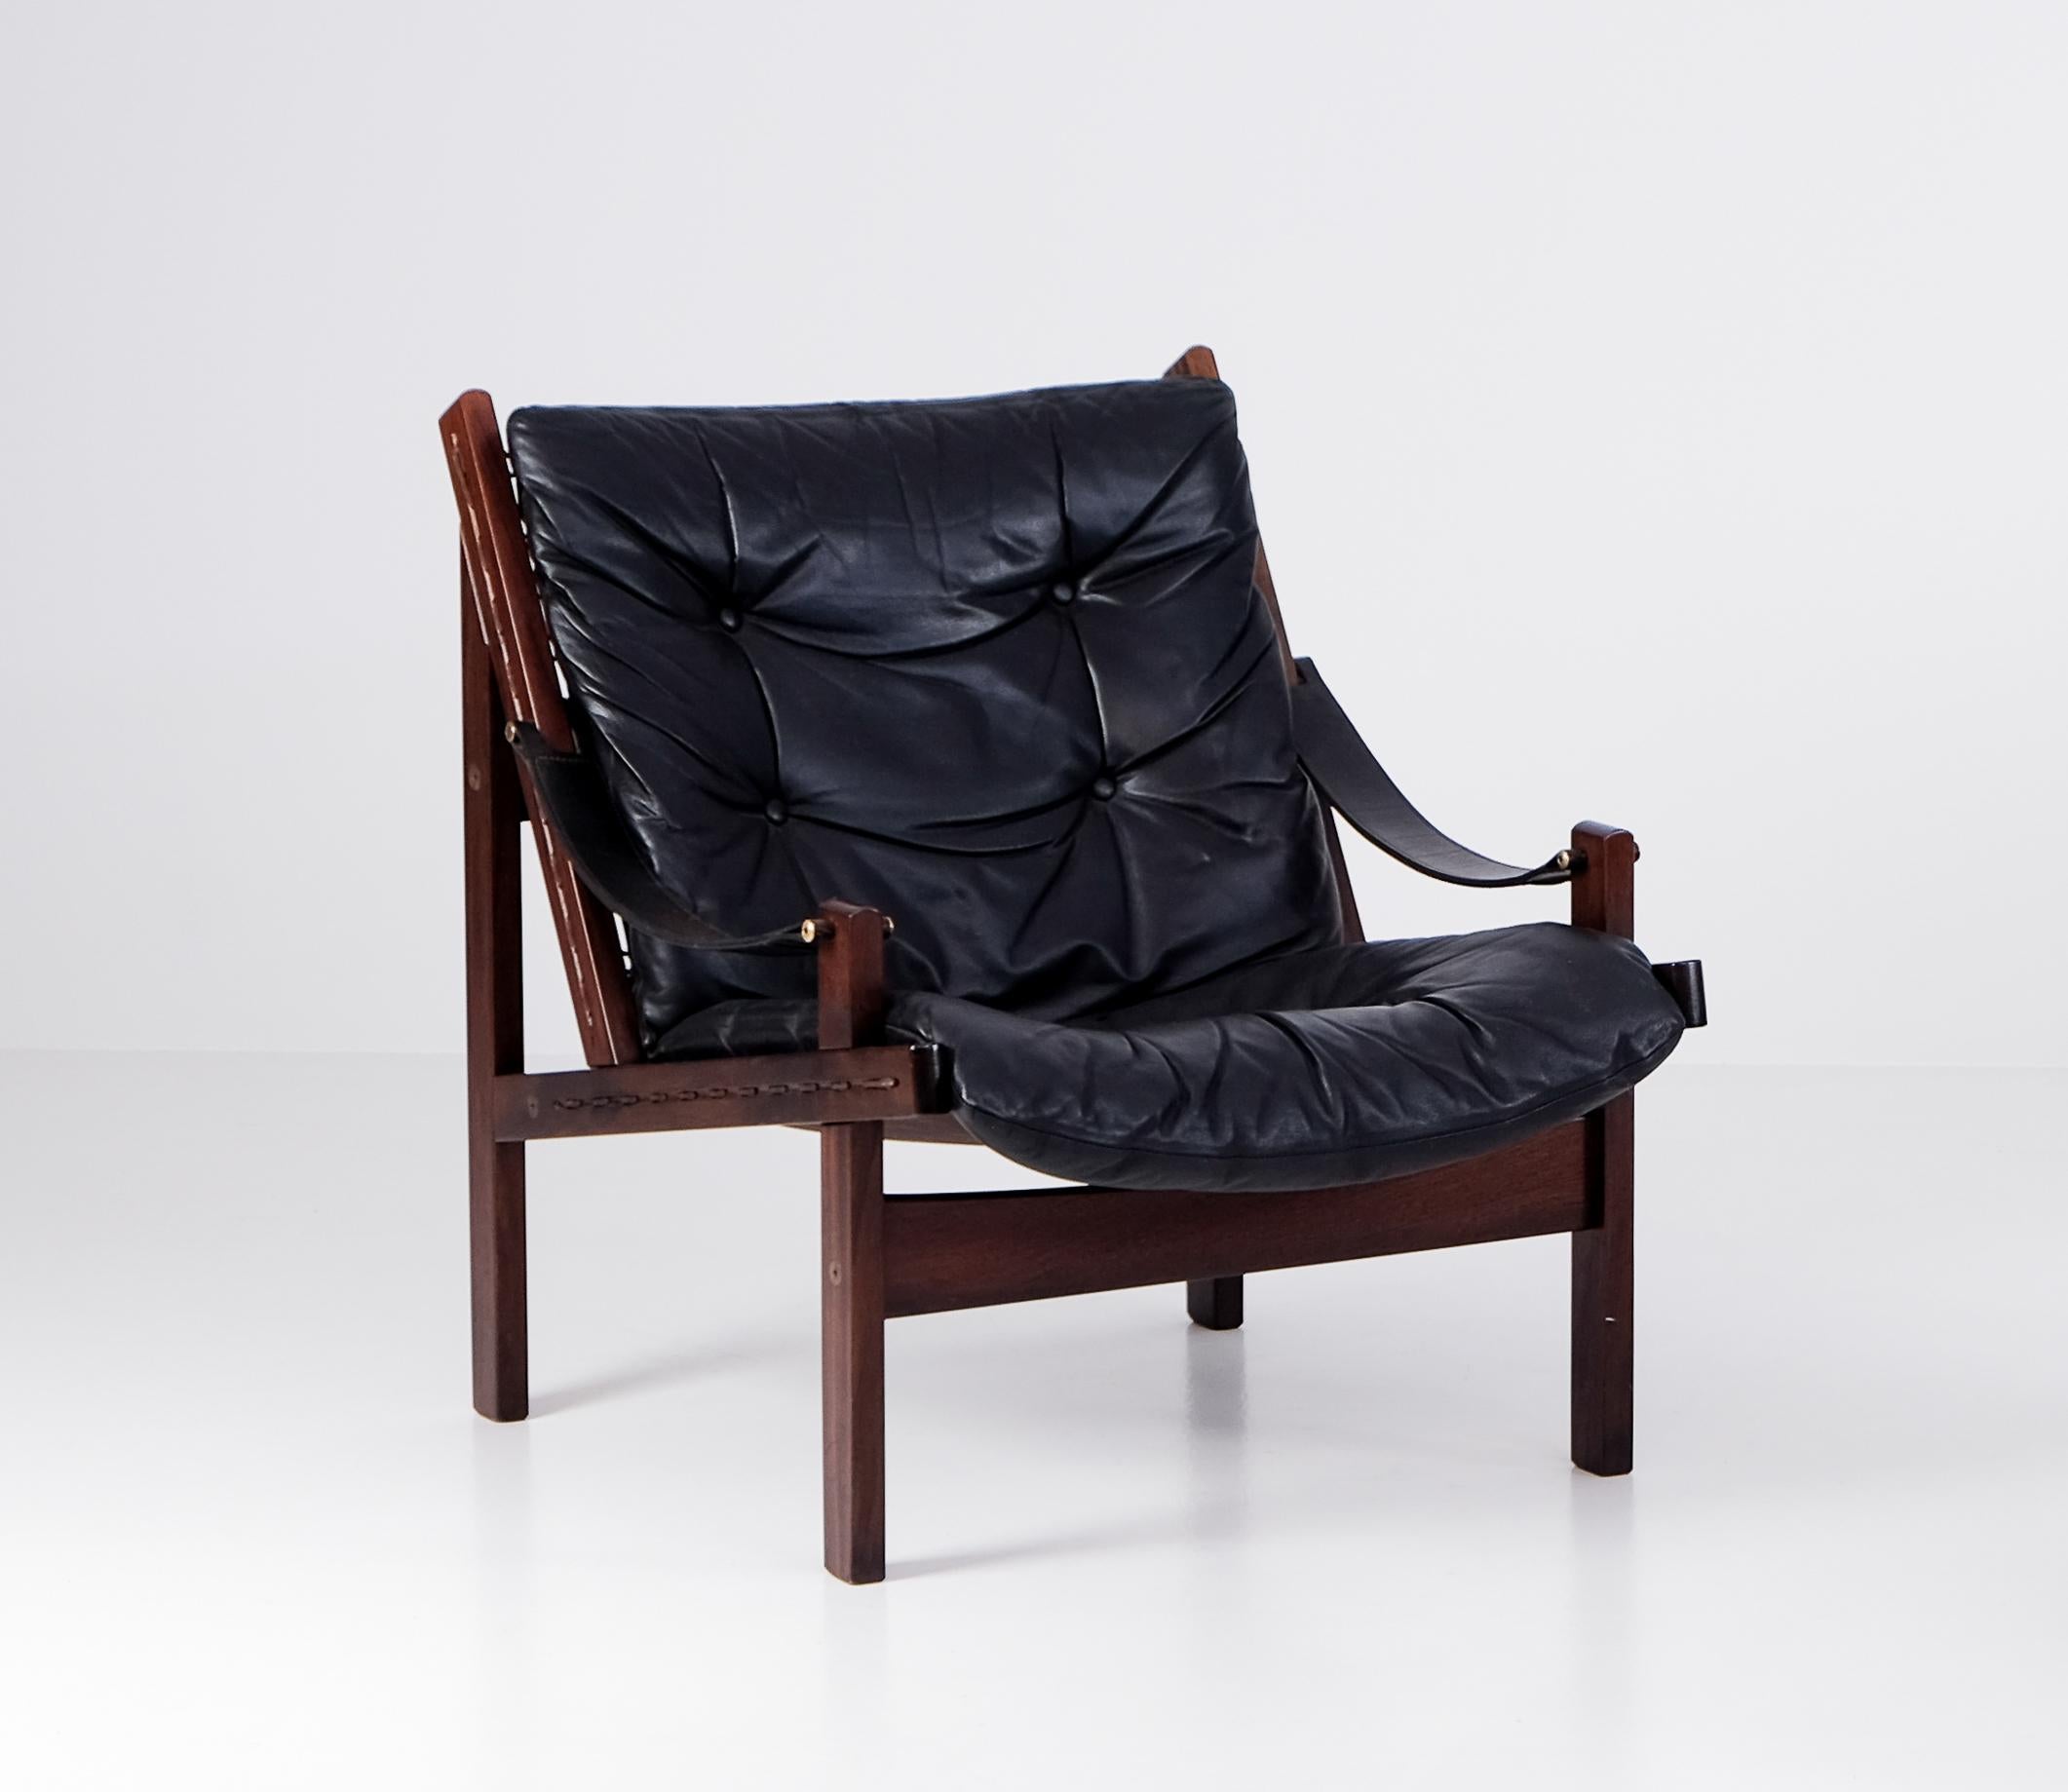 Great safari chair model Hunter designed by Torbjørn Afdal, produced by Bruksbo. Original black leather cushions and straps. Very good condition. 



